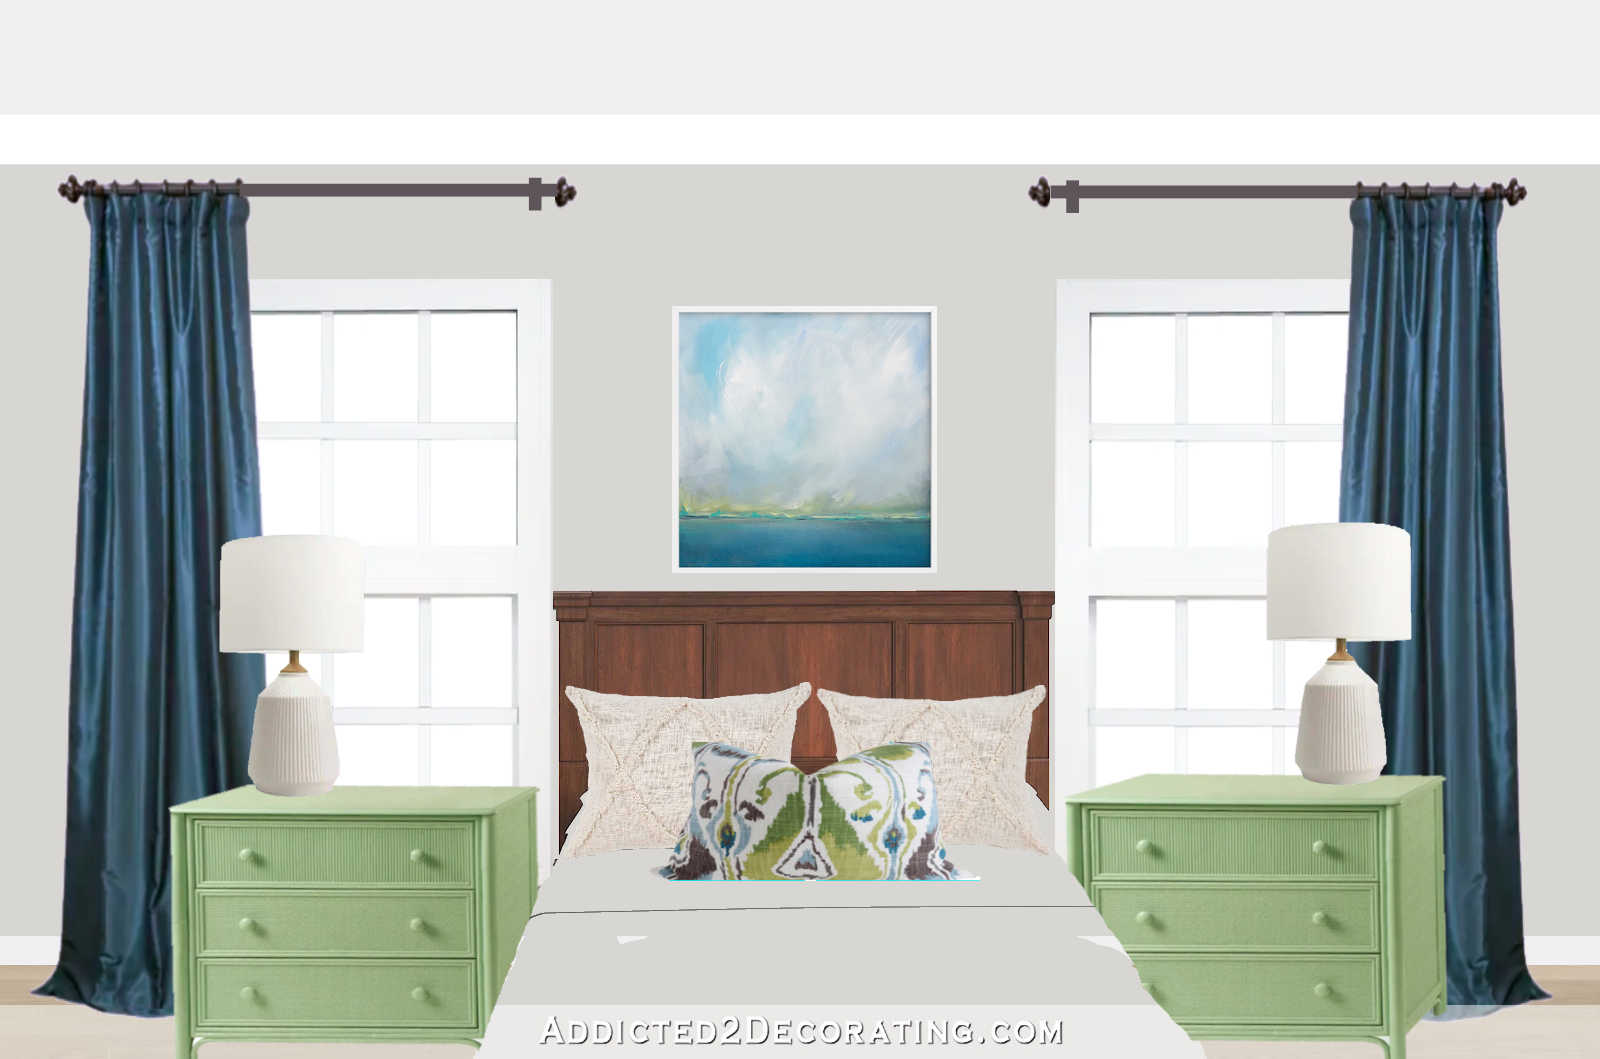 decorating a master bedroom - using artwork as a starting point for a decorating plan